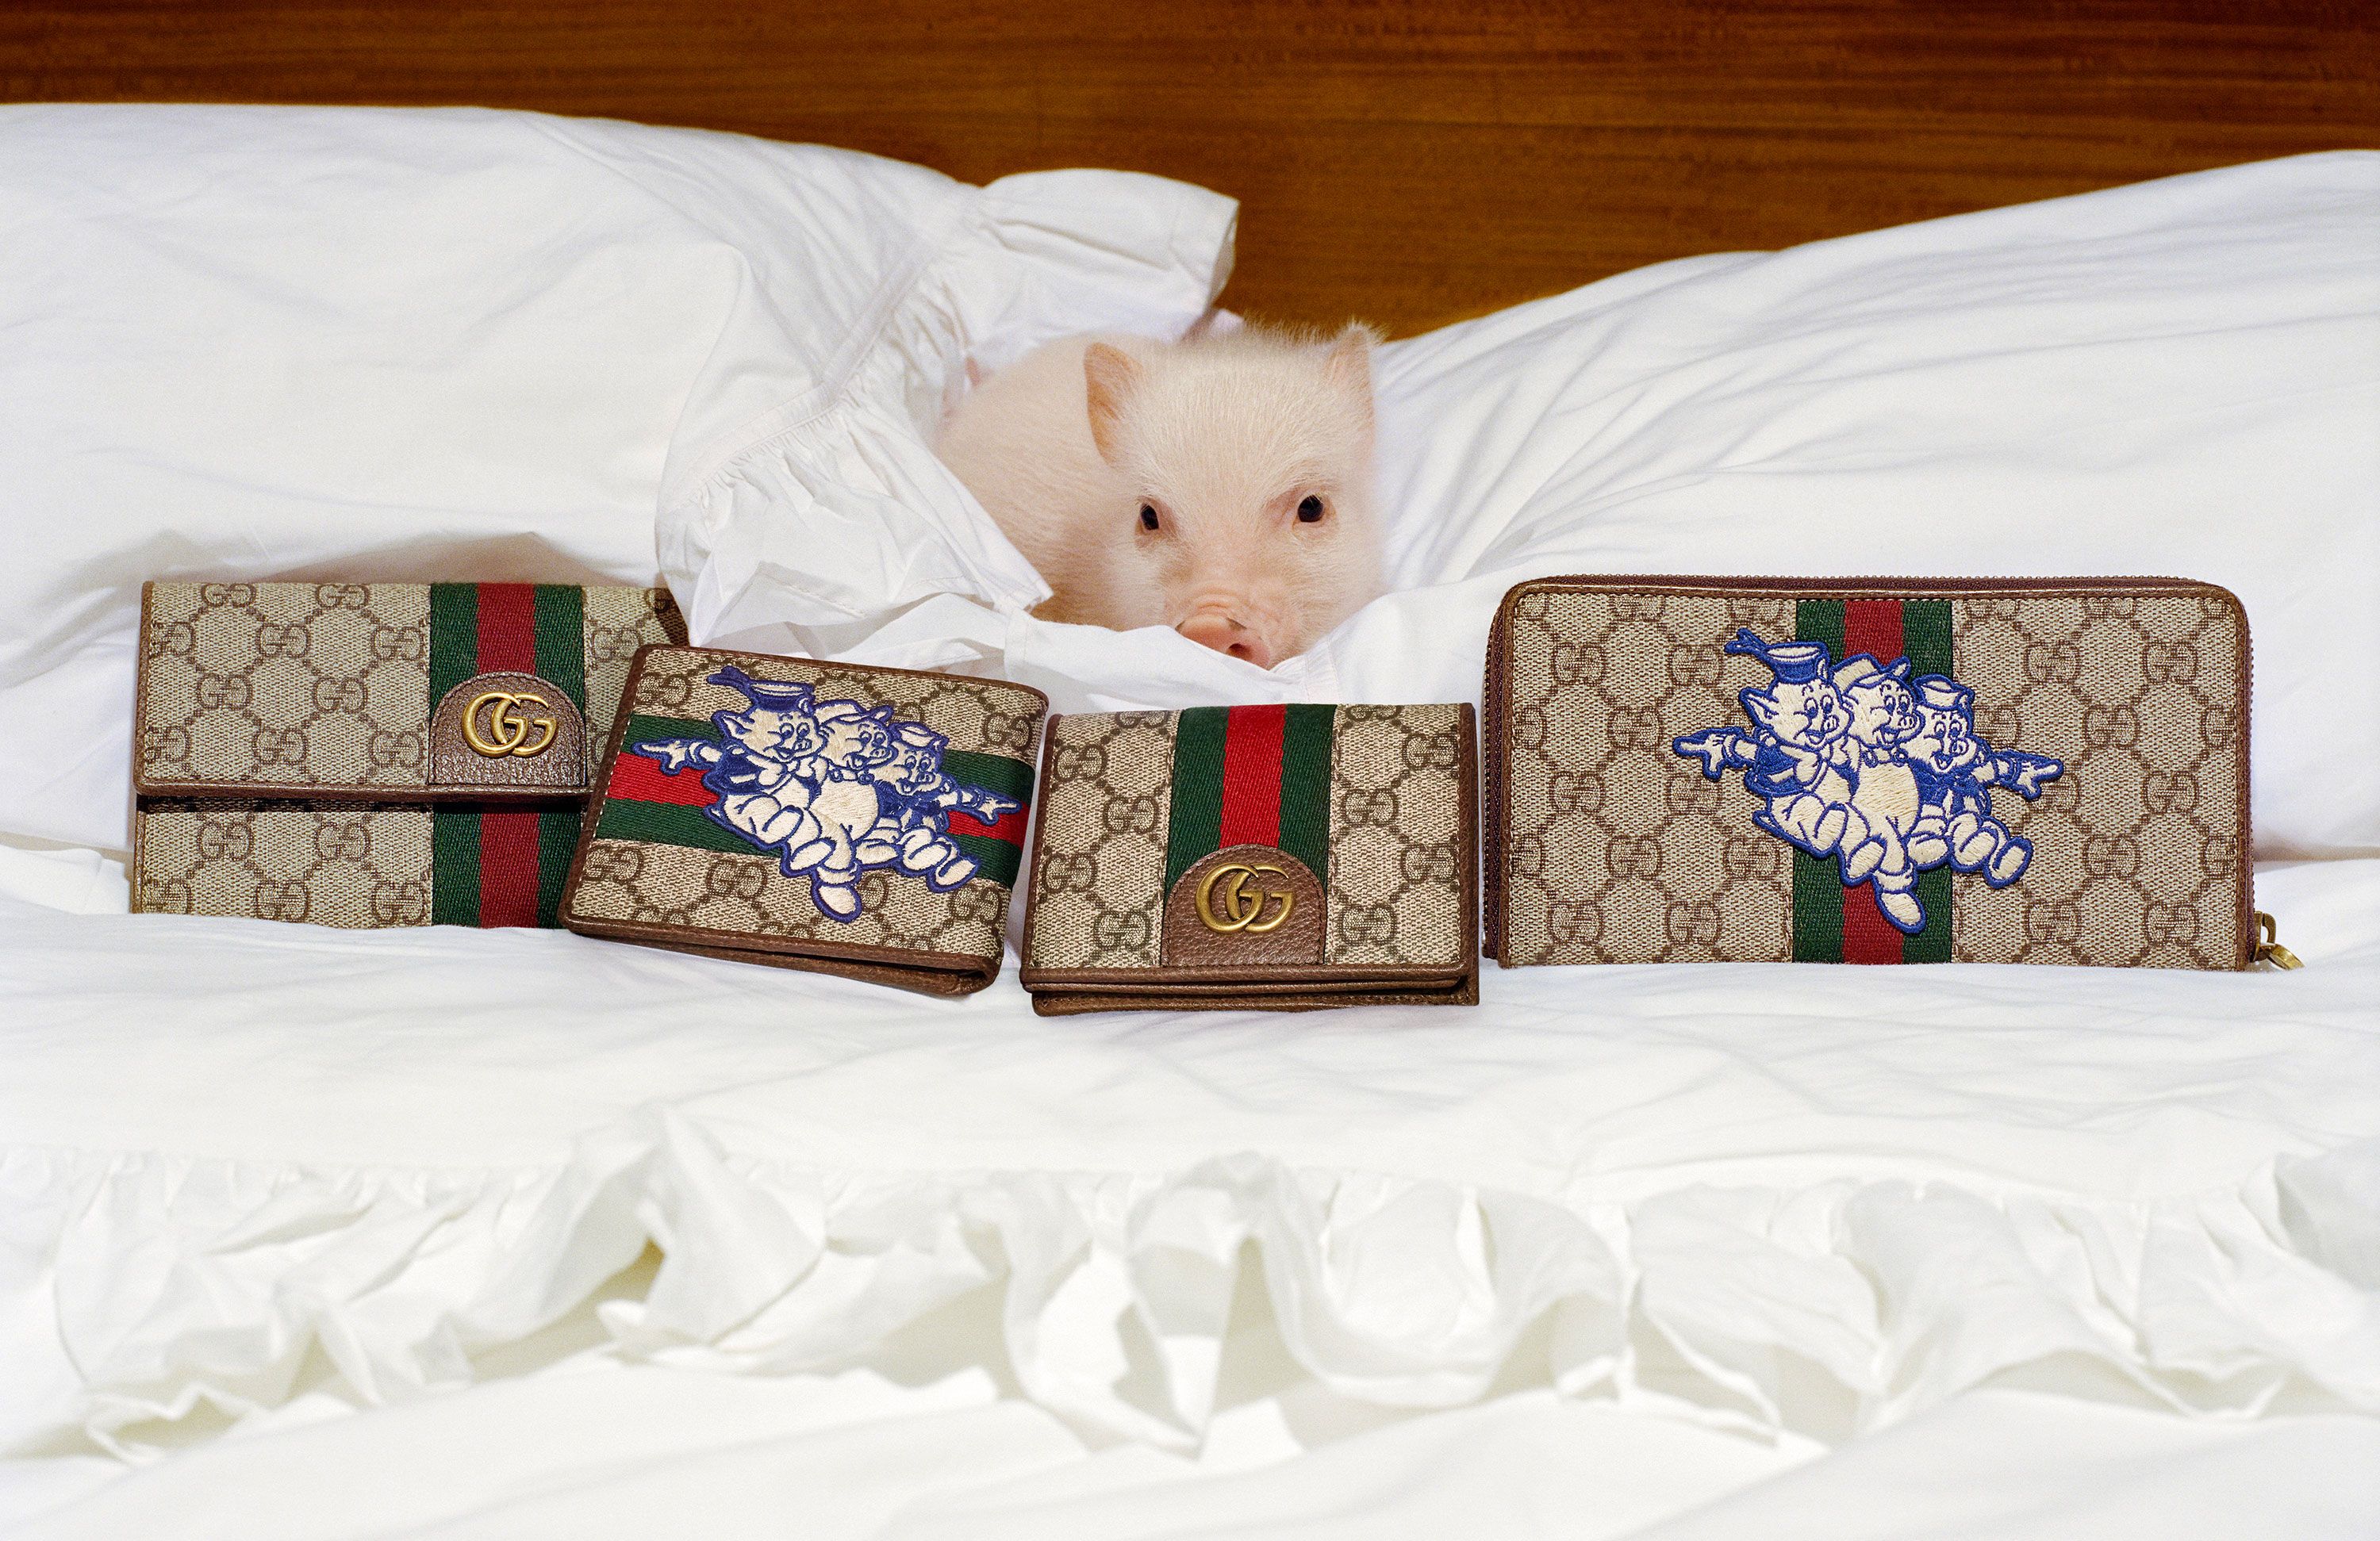 gucci chinese new year